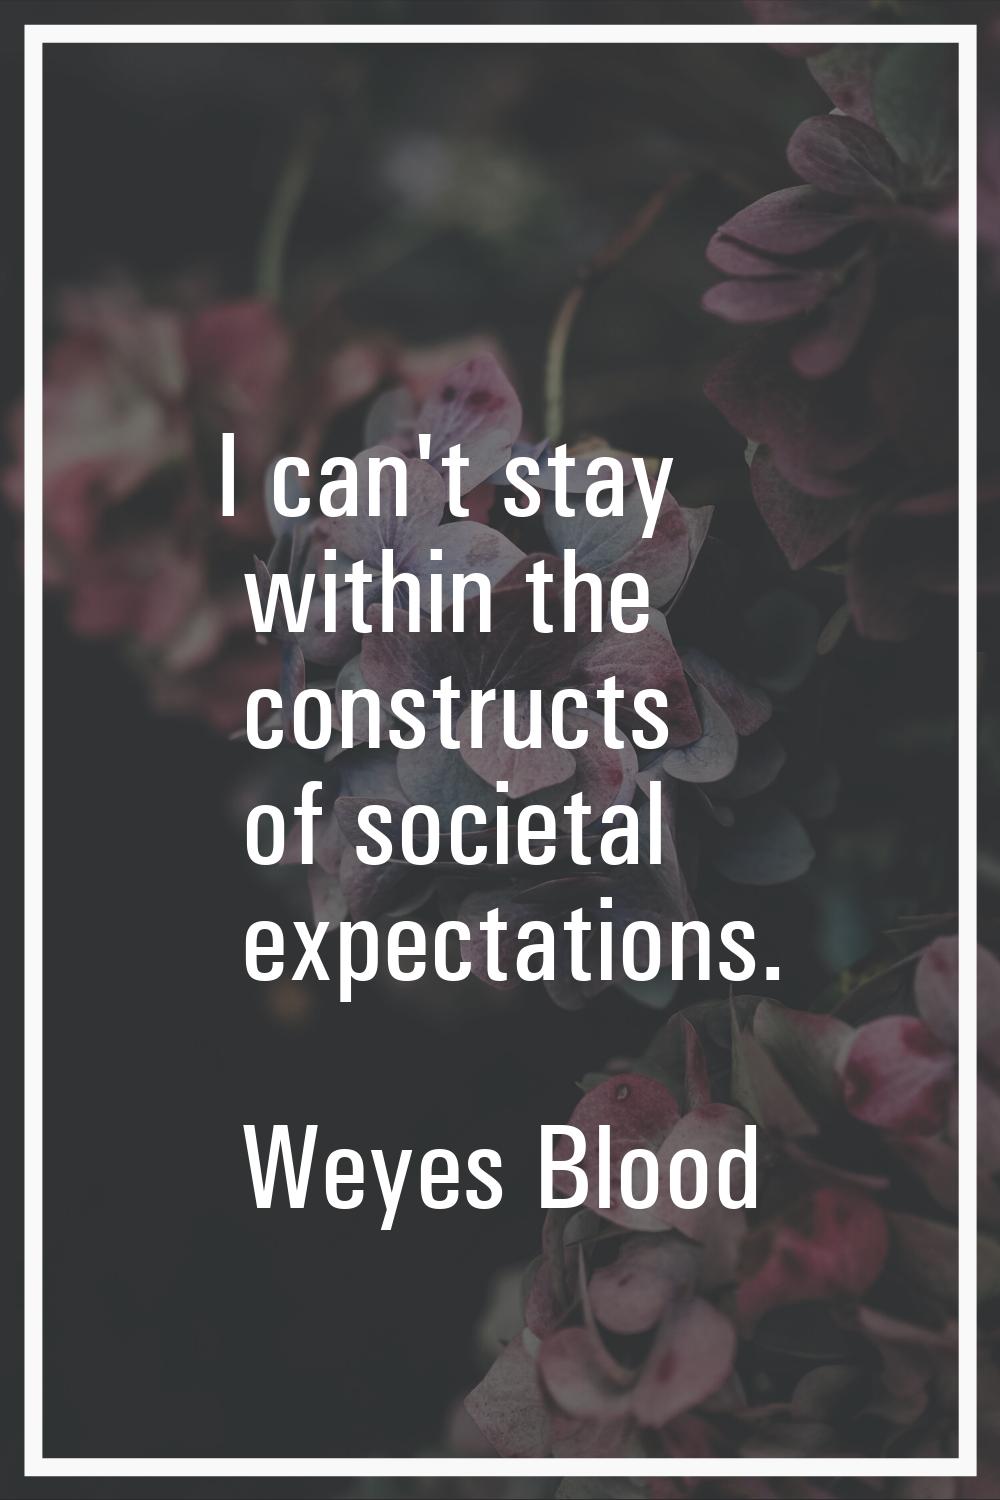 I can't stay within the constructs of societal expectations.